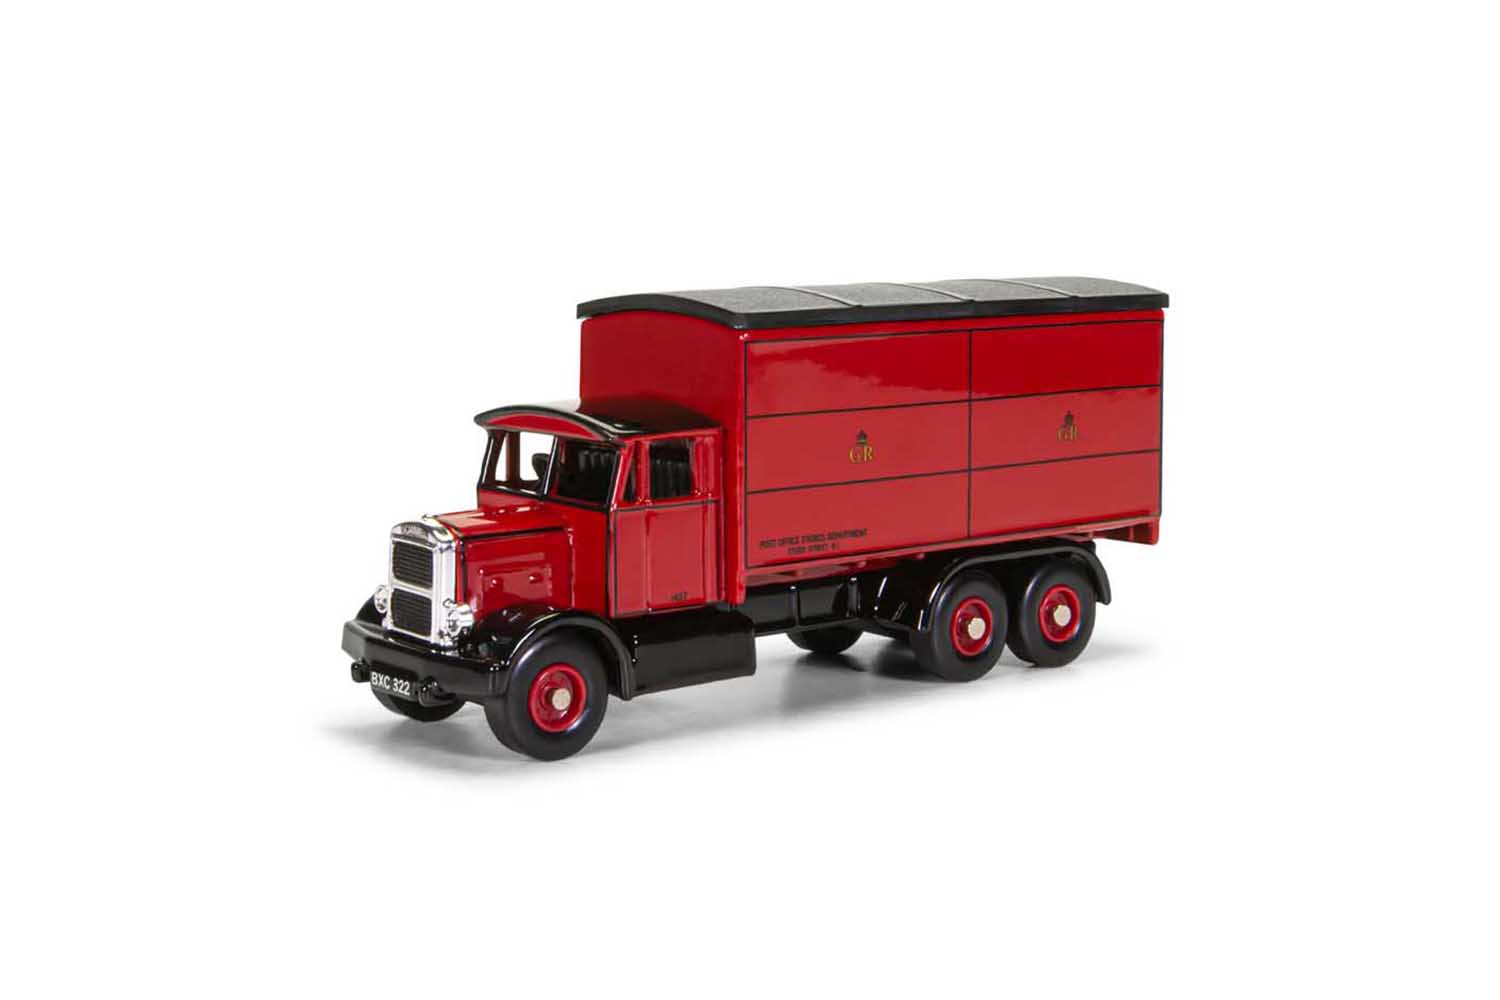 DG044047 Scammell Rigid Six - Post Office Stores Department